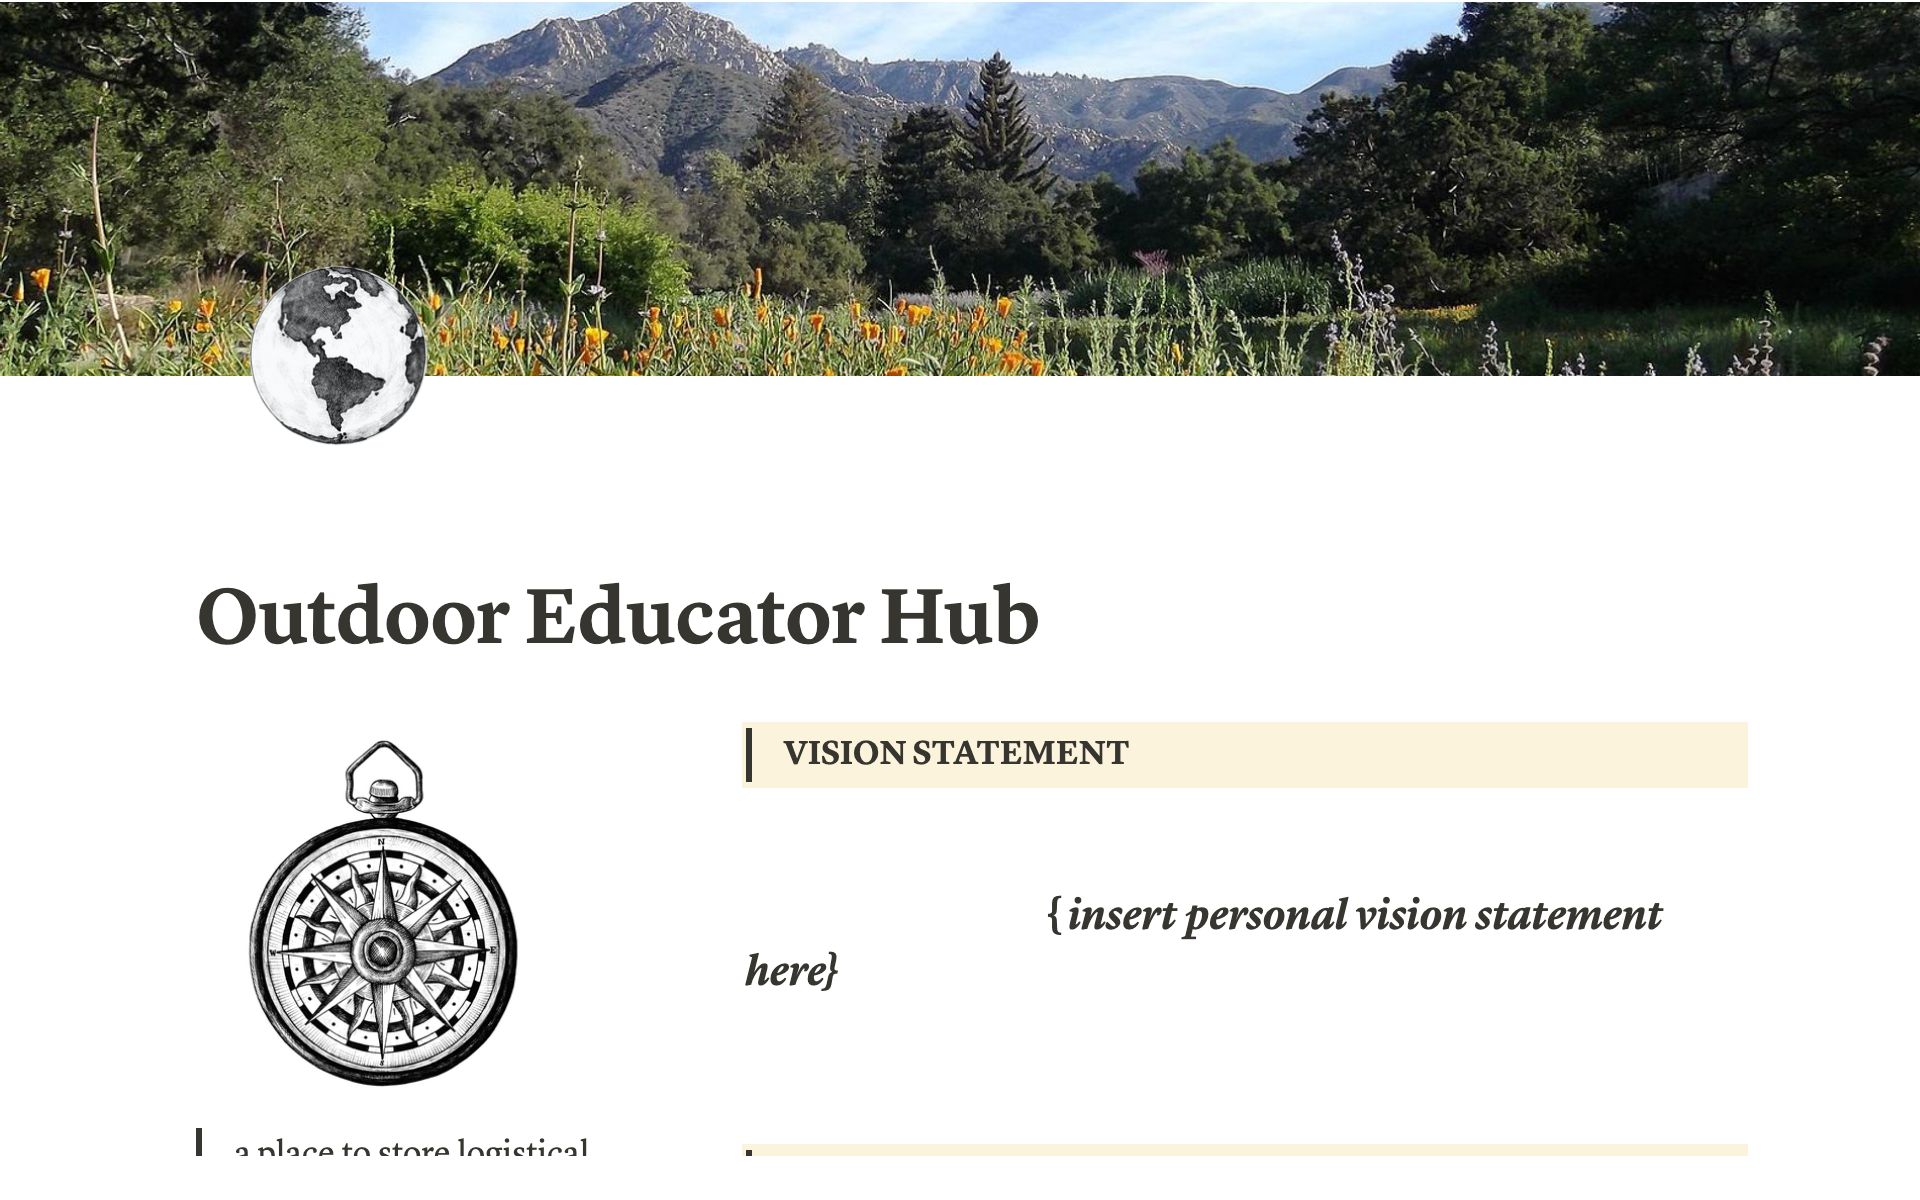 This template empowers outdoor educators to plan engaging place-based events; attend to accessibility concerns and land use policies; and manage post-event assessments.